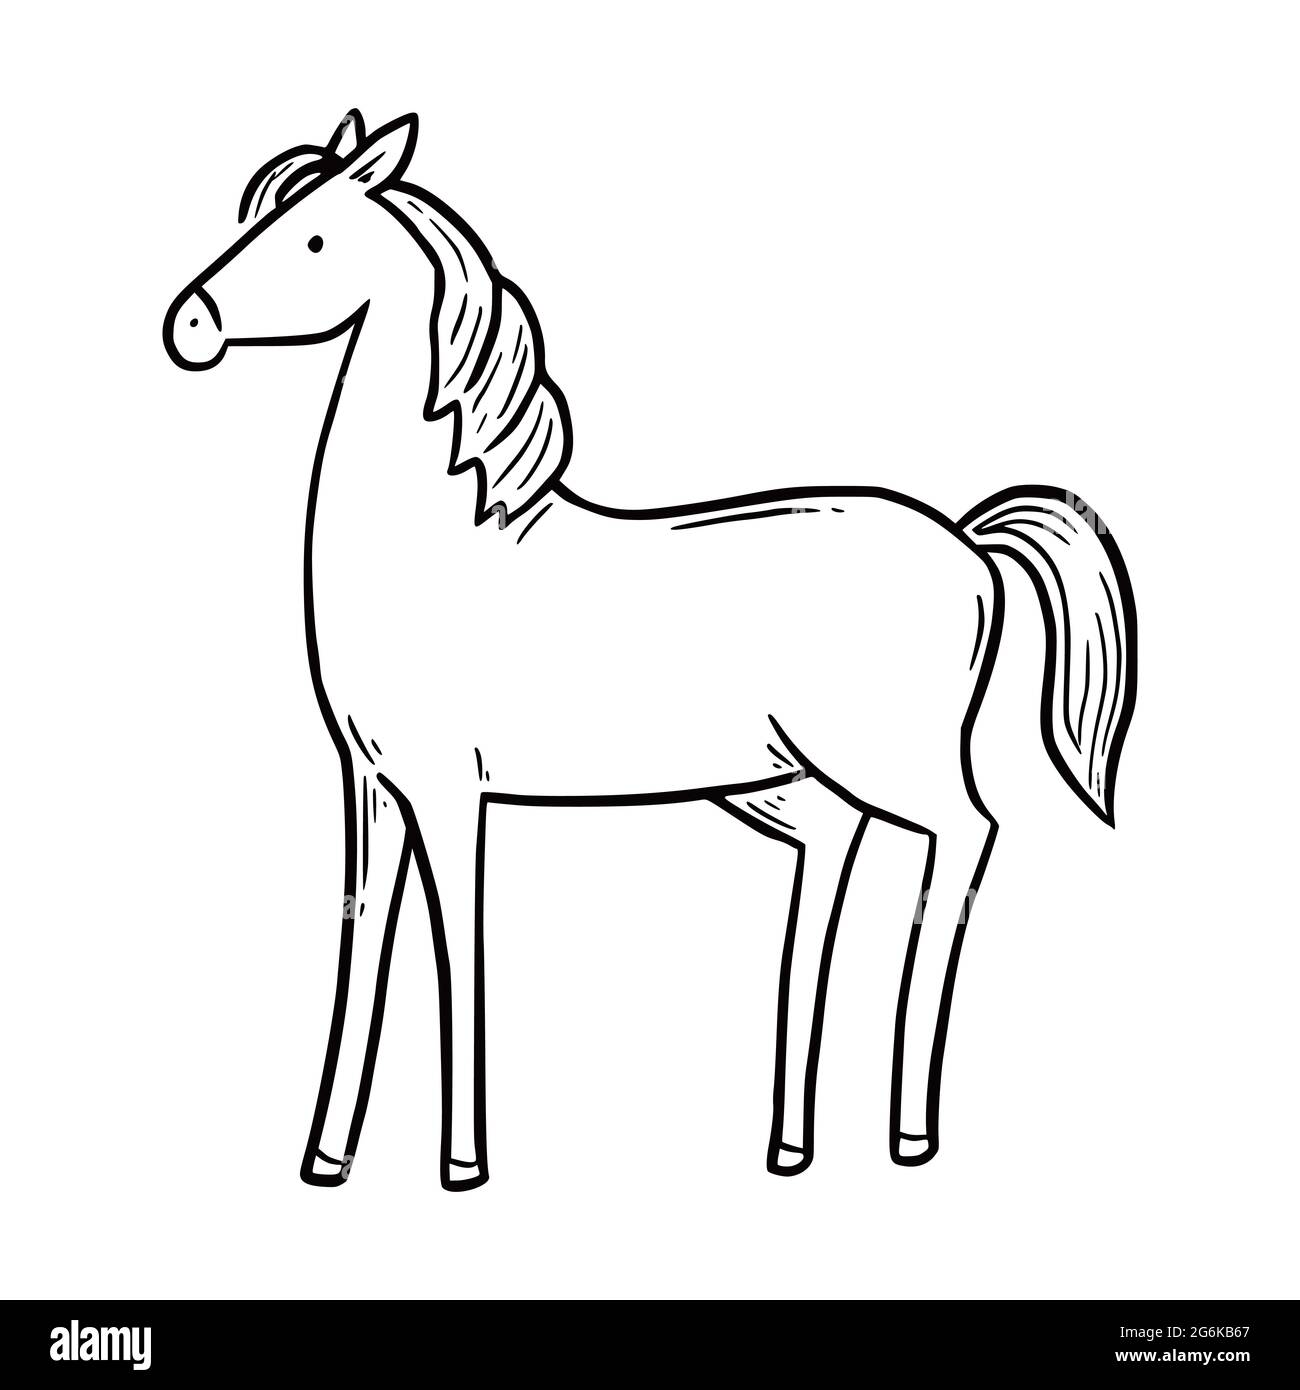 Hand drawn farm horse. Doodle sketch style. Drawing line horse icon. Isolated vector illustration. Stock Vector